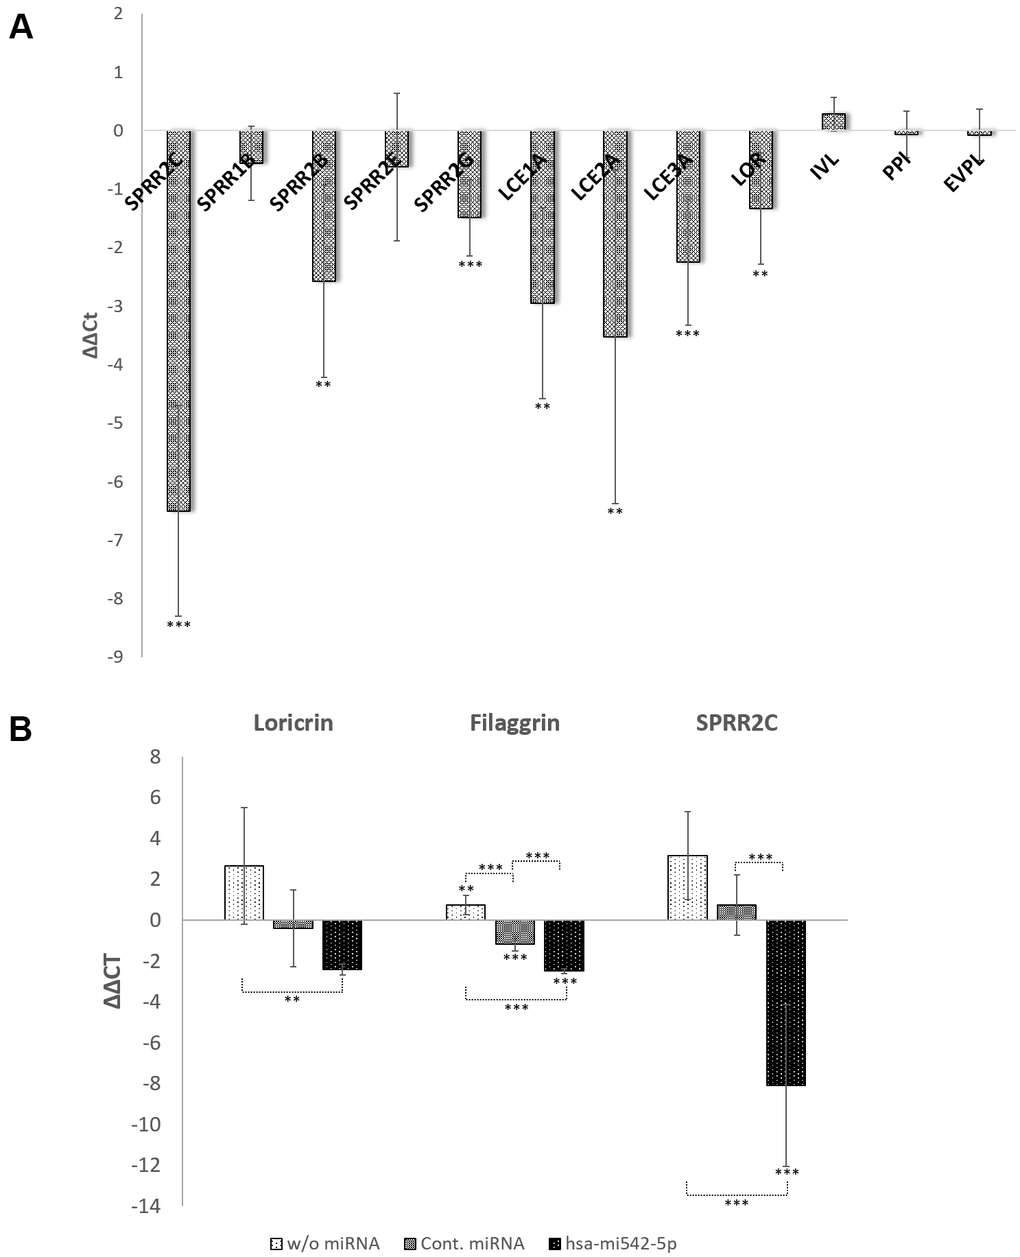 The role of the lncRNA SPRR2c and hsa-mir542-5p in keratinocyte differentiation. RT-PCR analysis of selected CE family members are presented as ΔΔCt values in (A, B). In (A) SPRR2C (pLL3.7-SPRR2c) is overexpressed after transduction of HaCaT cells with lentiviral particles. In (B) the increase of expression of several CE family members is analyzed after addition of 0.8 mM CaCl2 and transfection of HaCaT cells with hsa-mir542a-5p (N=4; *: p